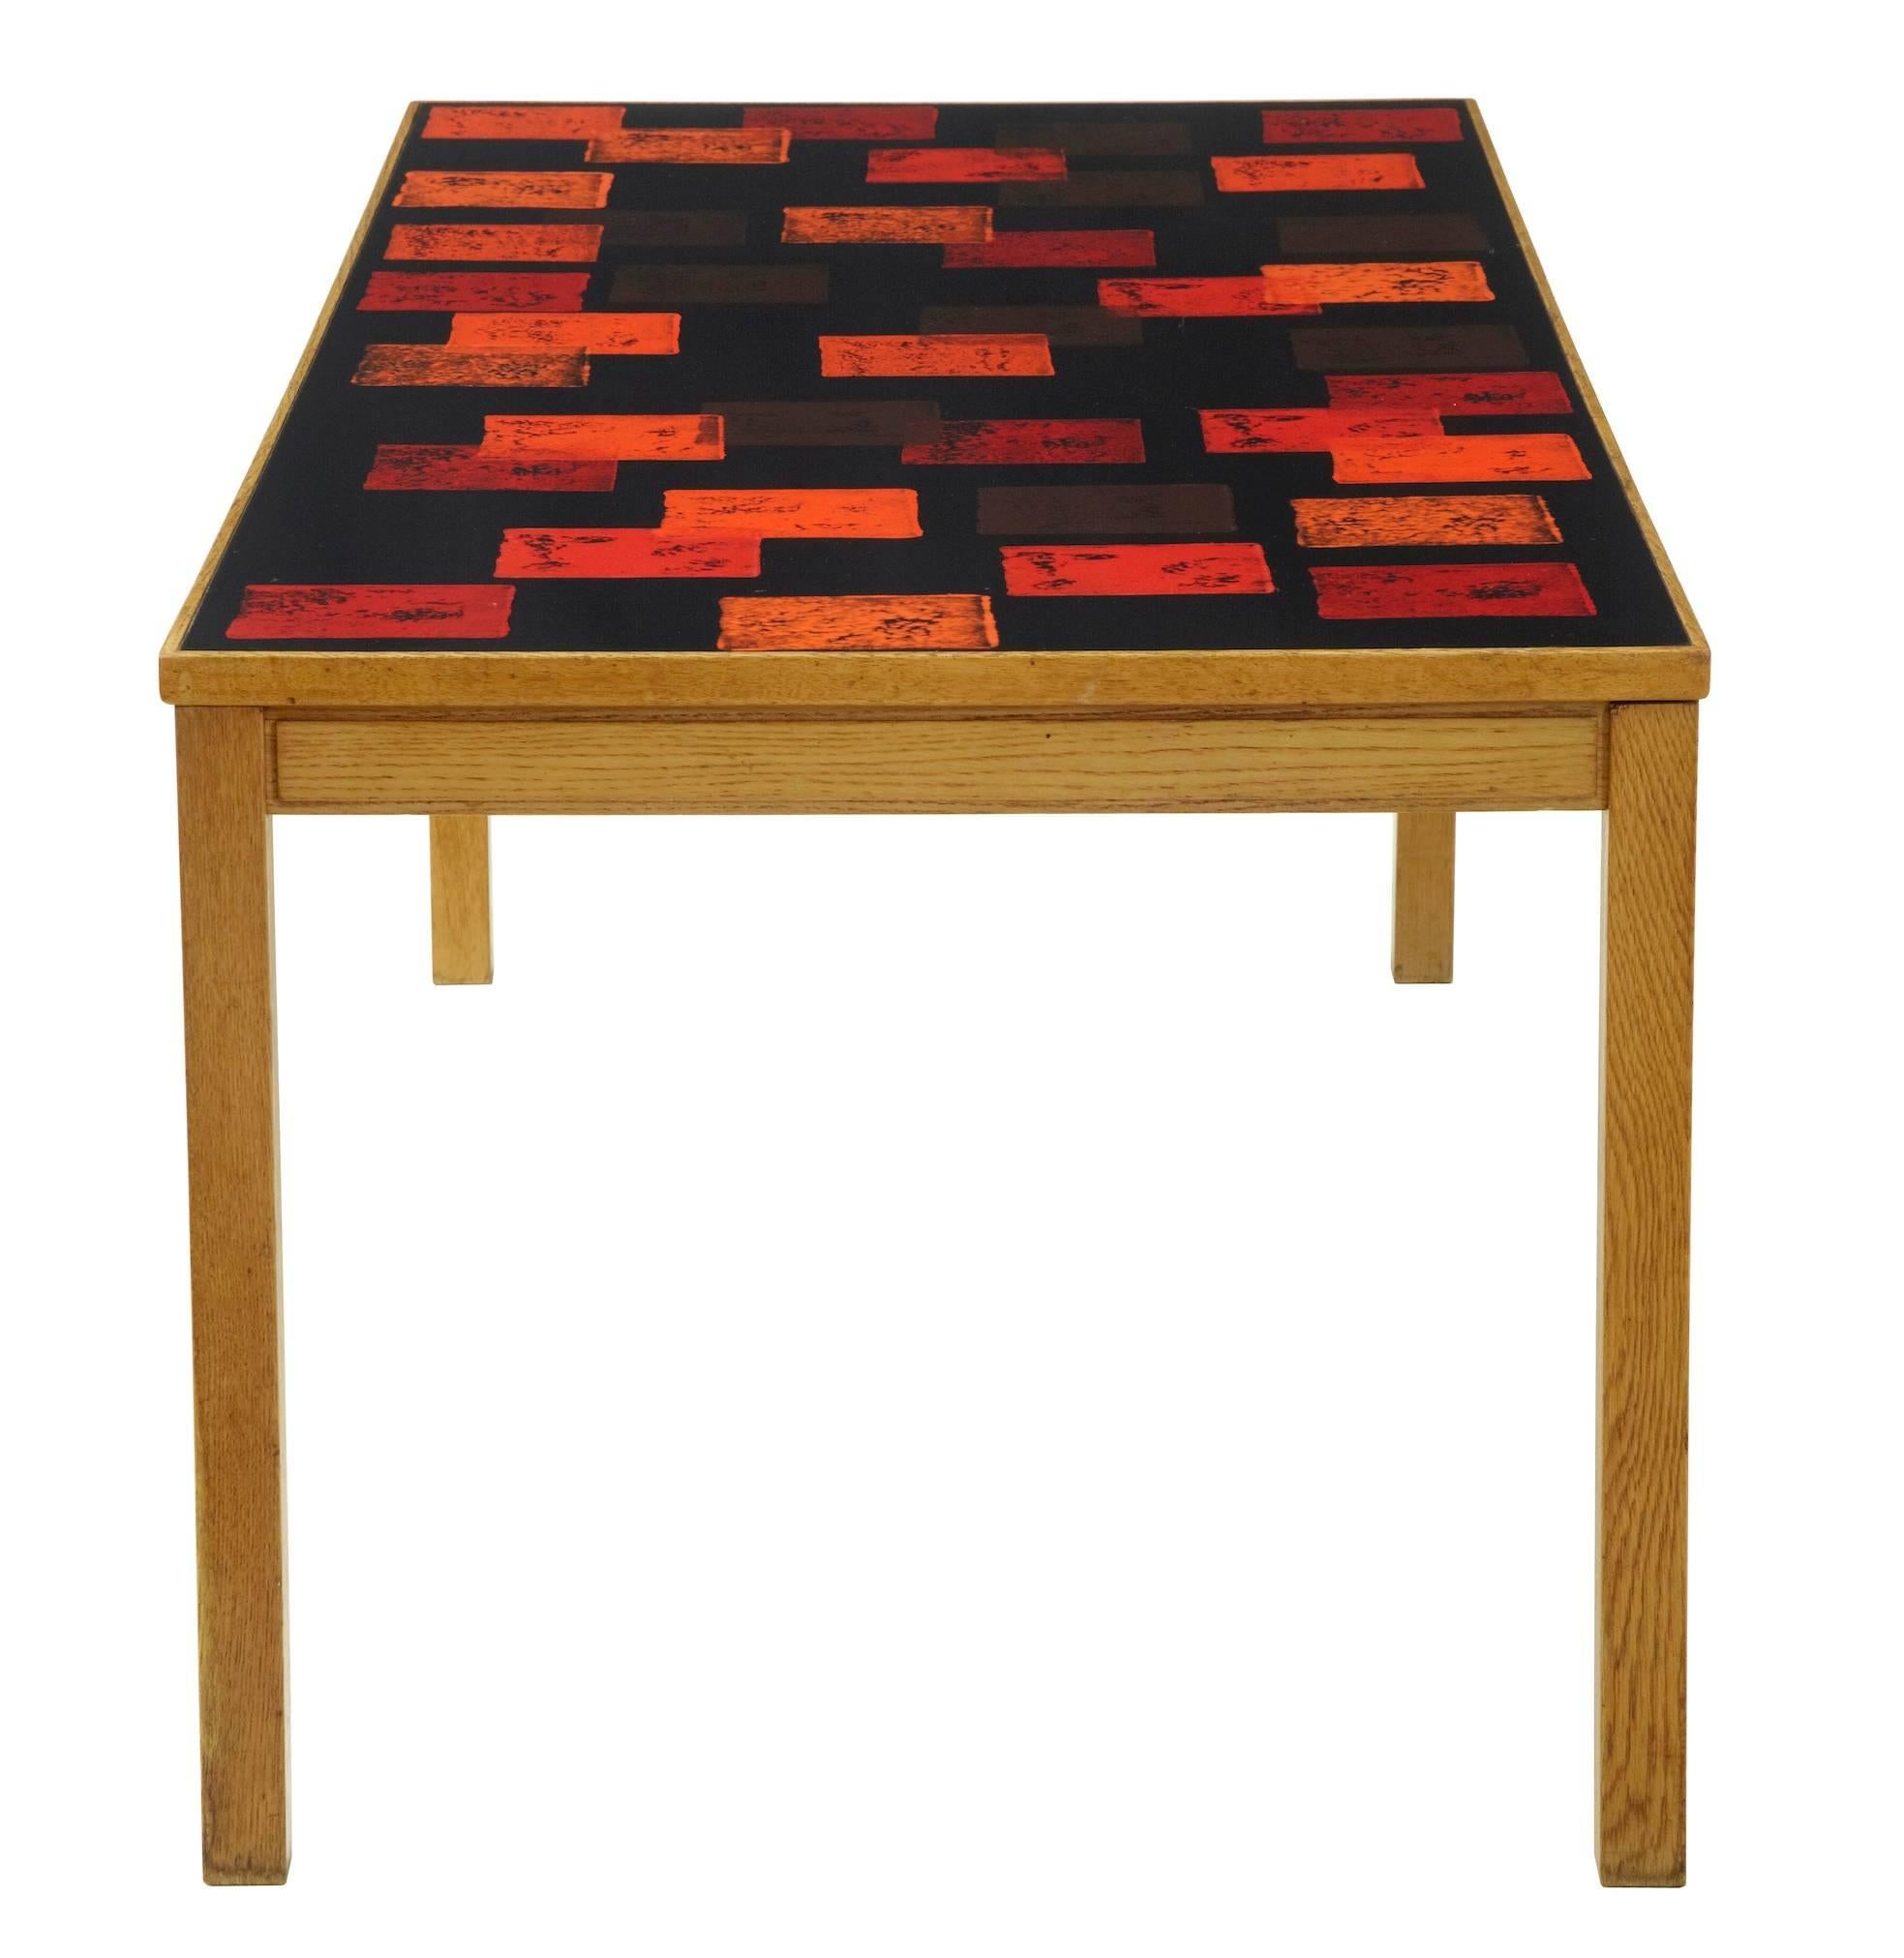 Collectable table by David Rosen, circa 1963.
Enamel top signed by the creator p torneman.
Makers label underneath with date stamp.
Wood work would benefit a strip and repolish to restore to former glory, enamel top is in good order with minor